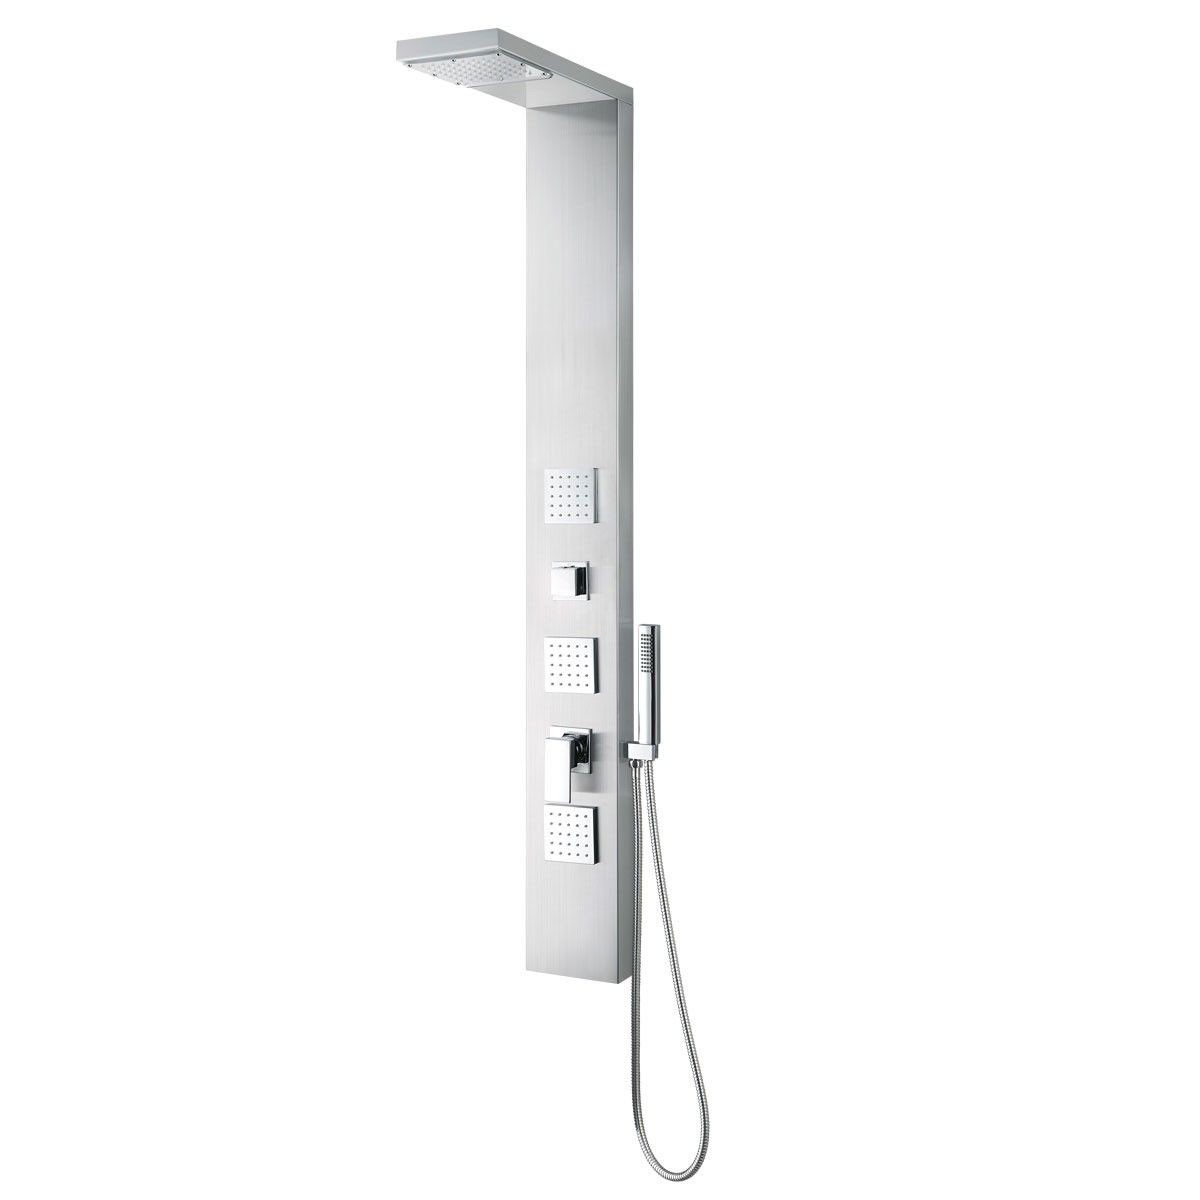 Brushed Stainless Steel Thermostatic Shower Panel System (JX-9851)